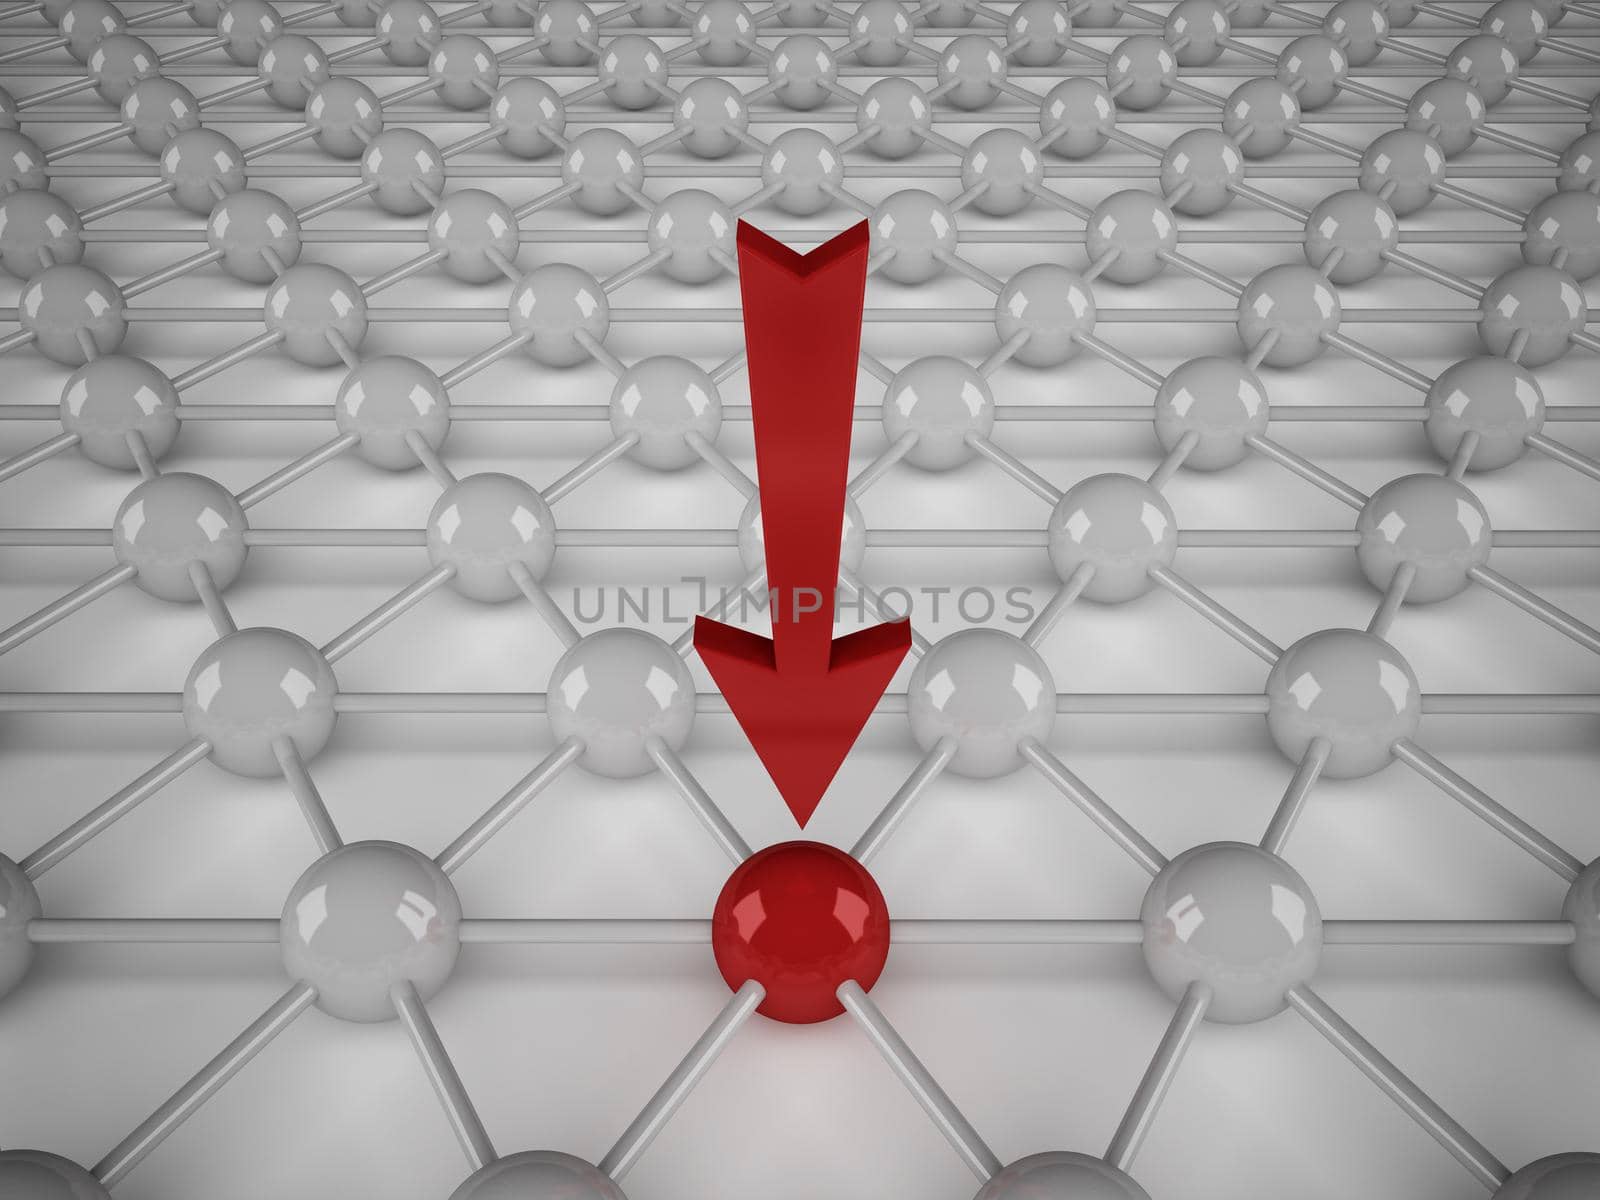 the red arrow indicates a red ball of white balls